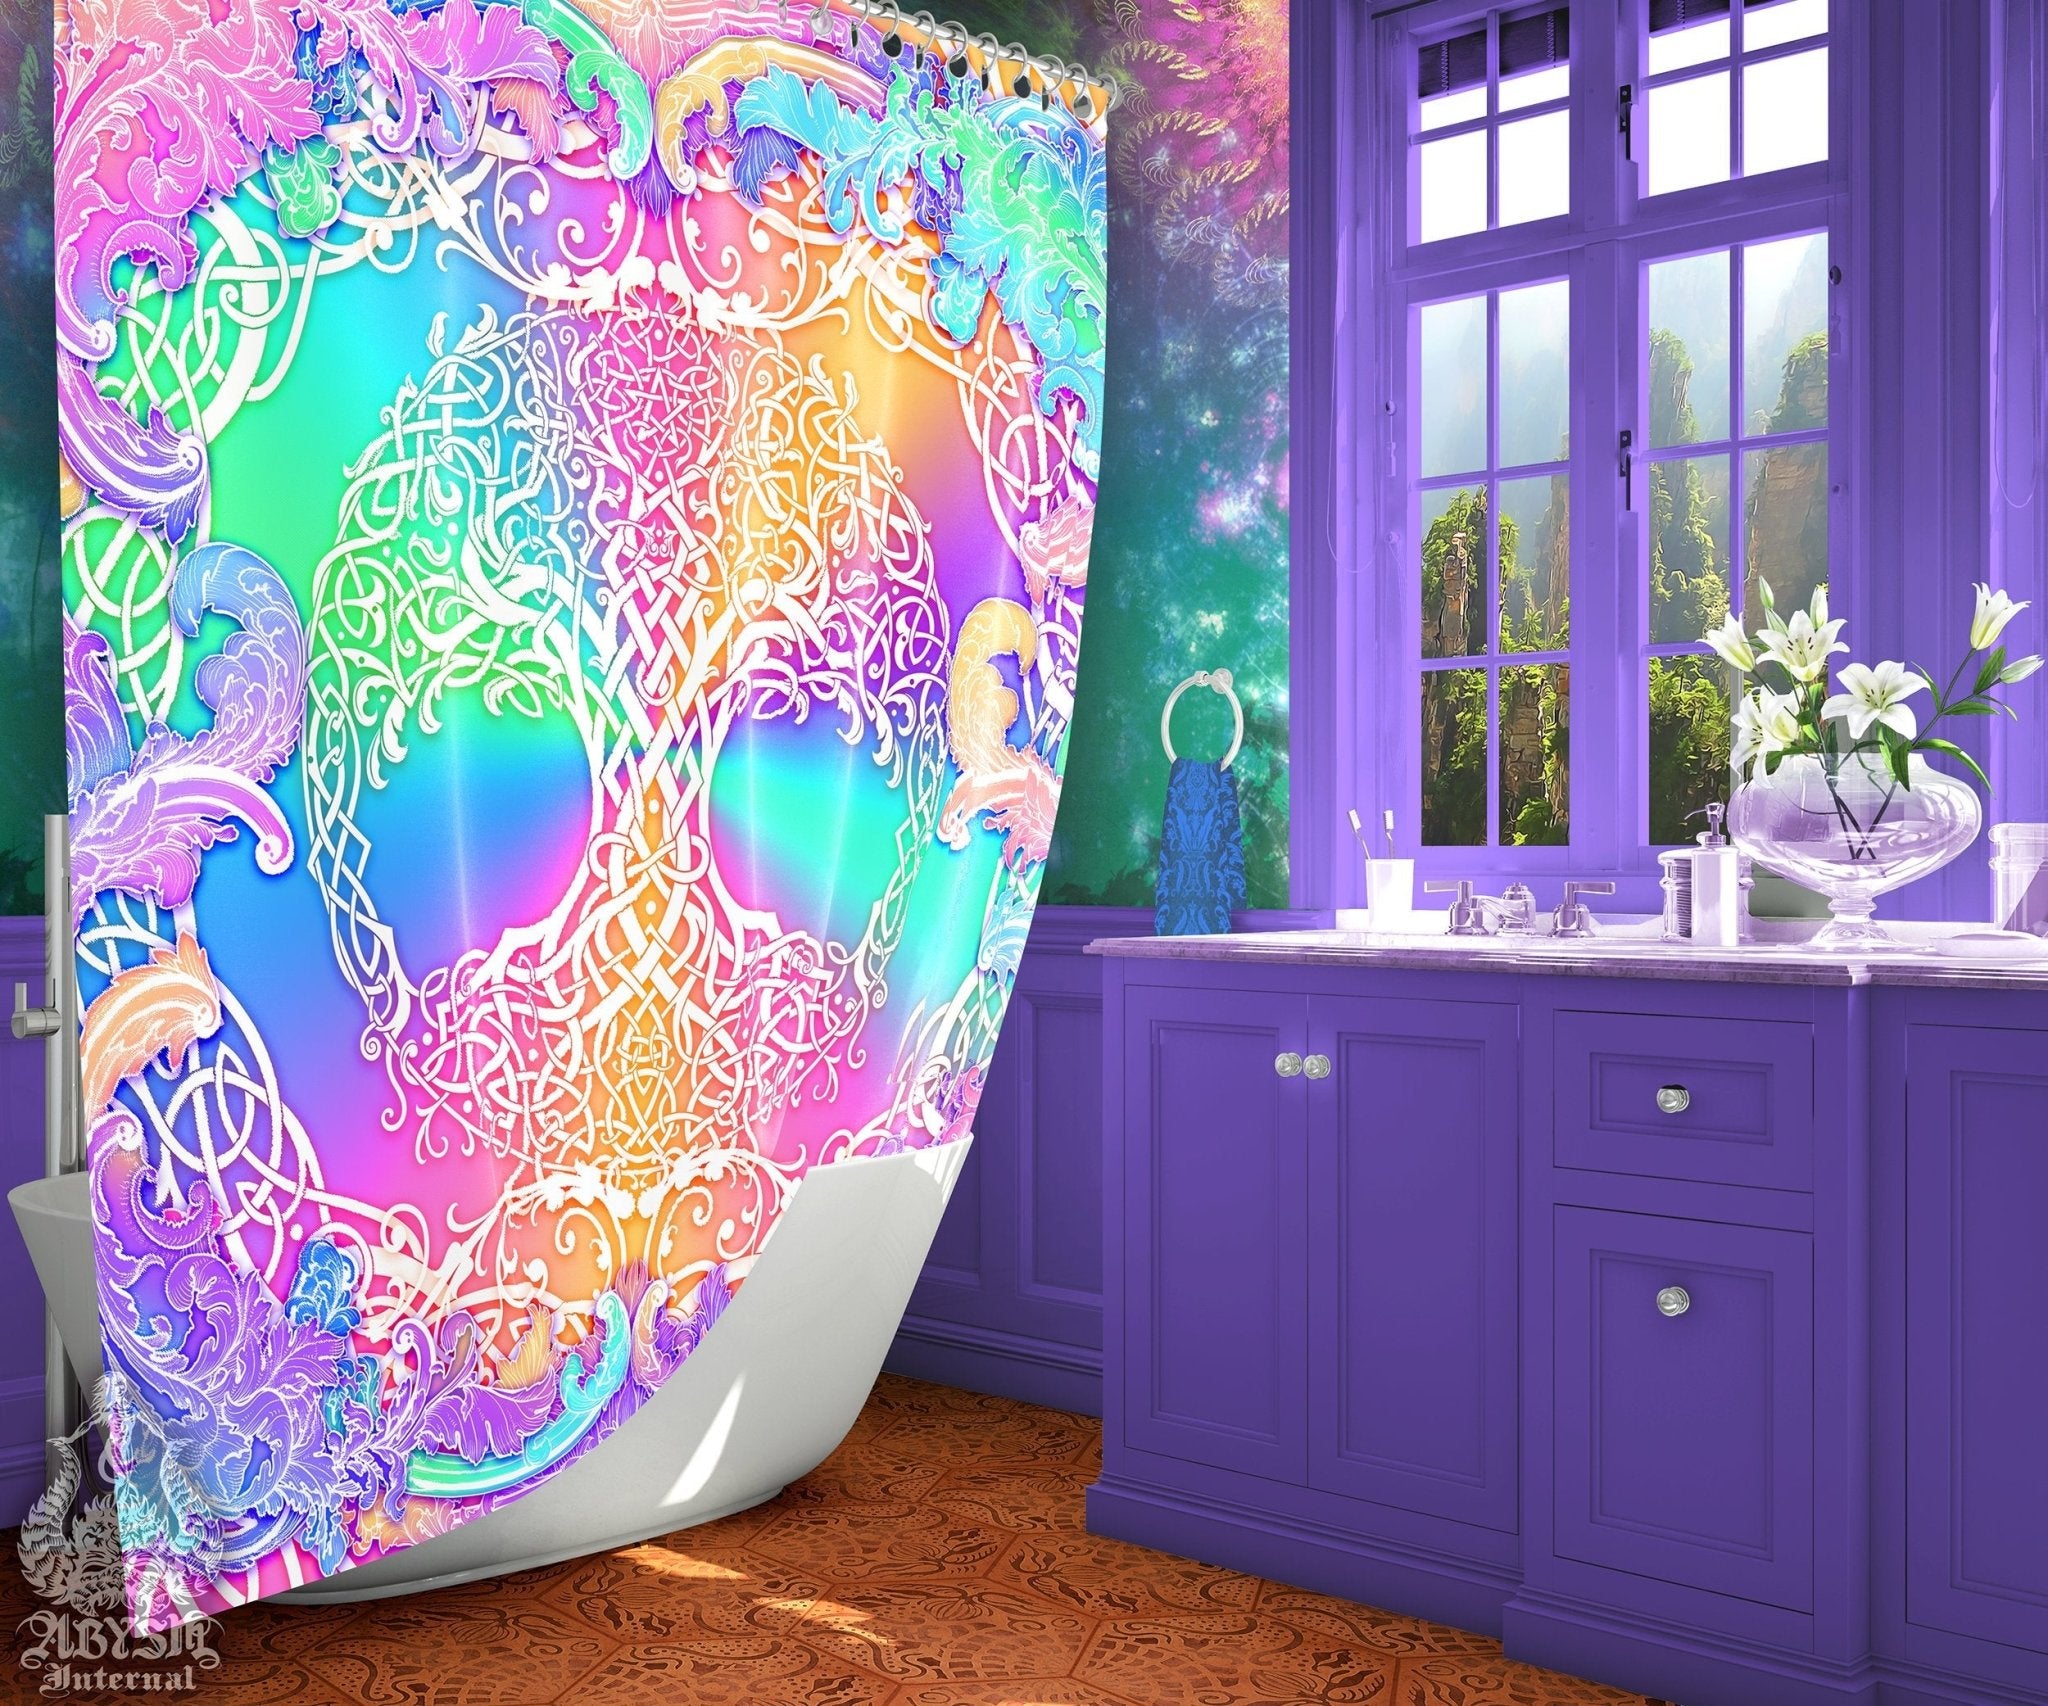 Tree of Life Shower Curtain, Holographic Bathroom Decor, Fairy Kei, Celtic Knot, Eclectic and Funky Home - Witchy Pastel Home, Aesthetic - Abysm Internal